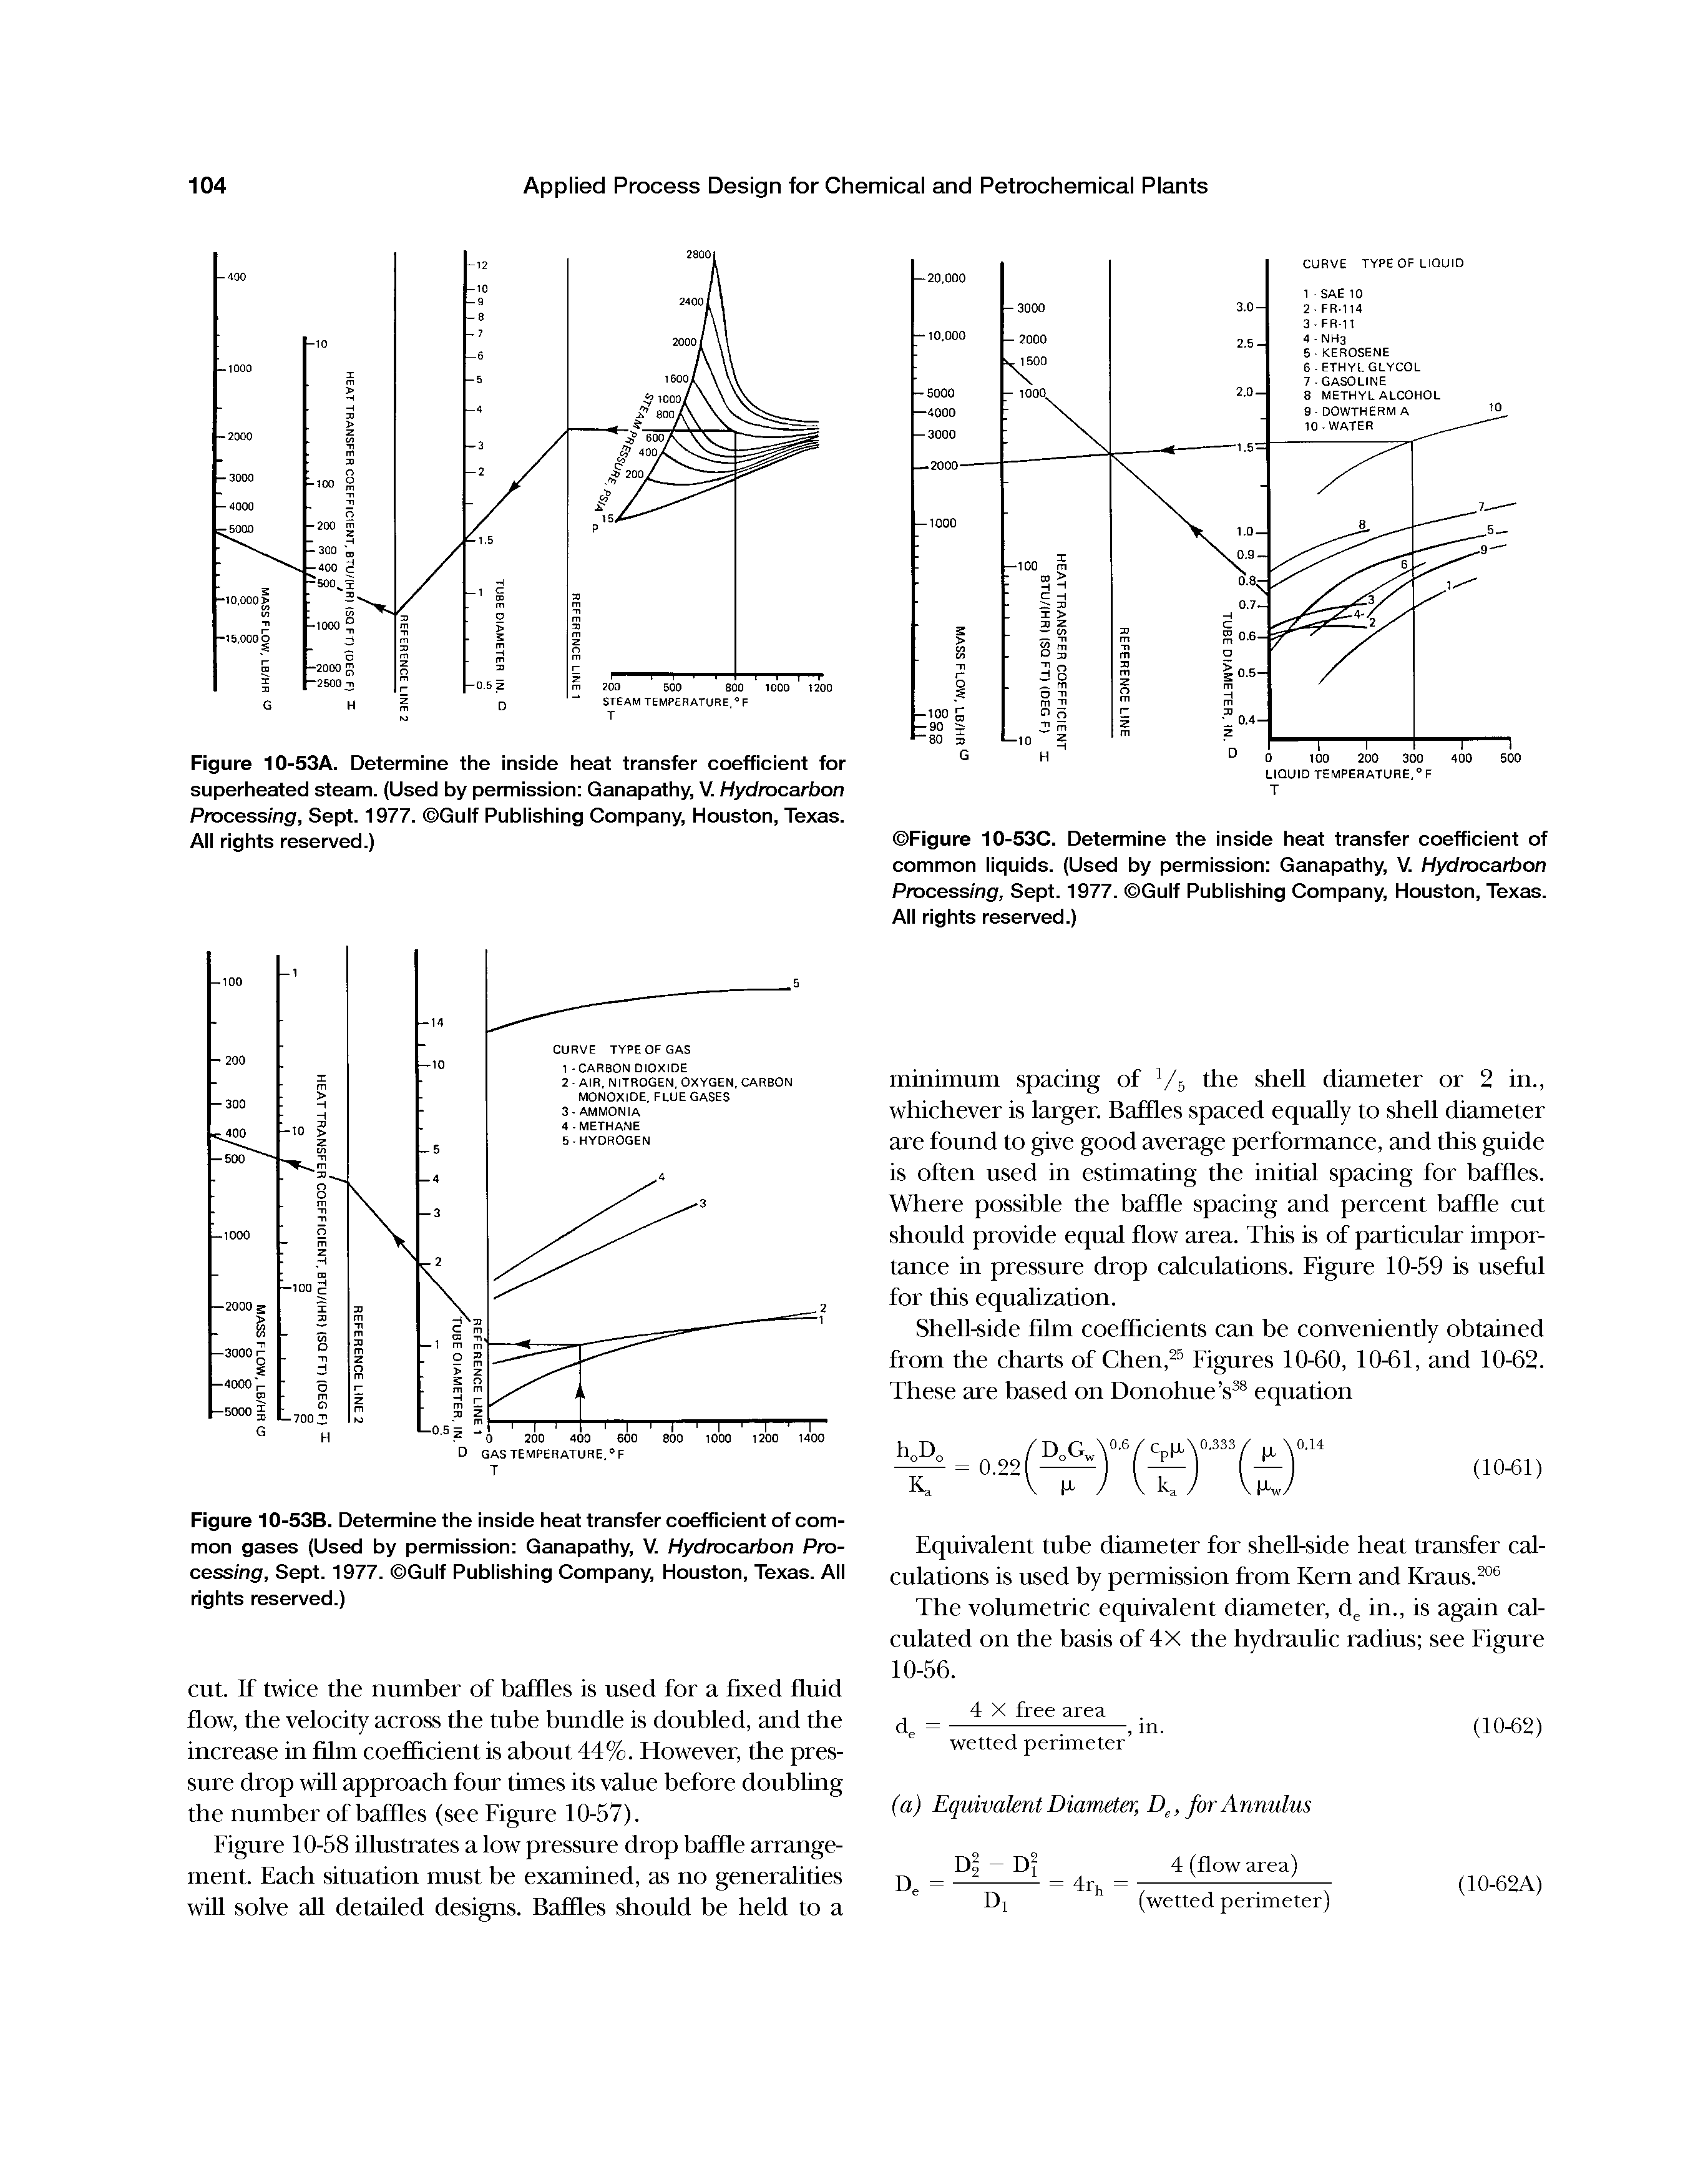 Figure 10-53A. Determine the inside heat transfer coefficient for superheated steam. (Used by permission Ganapathy, V. Hydrocarbon Processing, Sept. 1977. Gulf Publishing Company, Houston, Texas. All rights reserved.)...